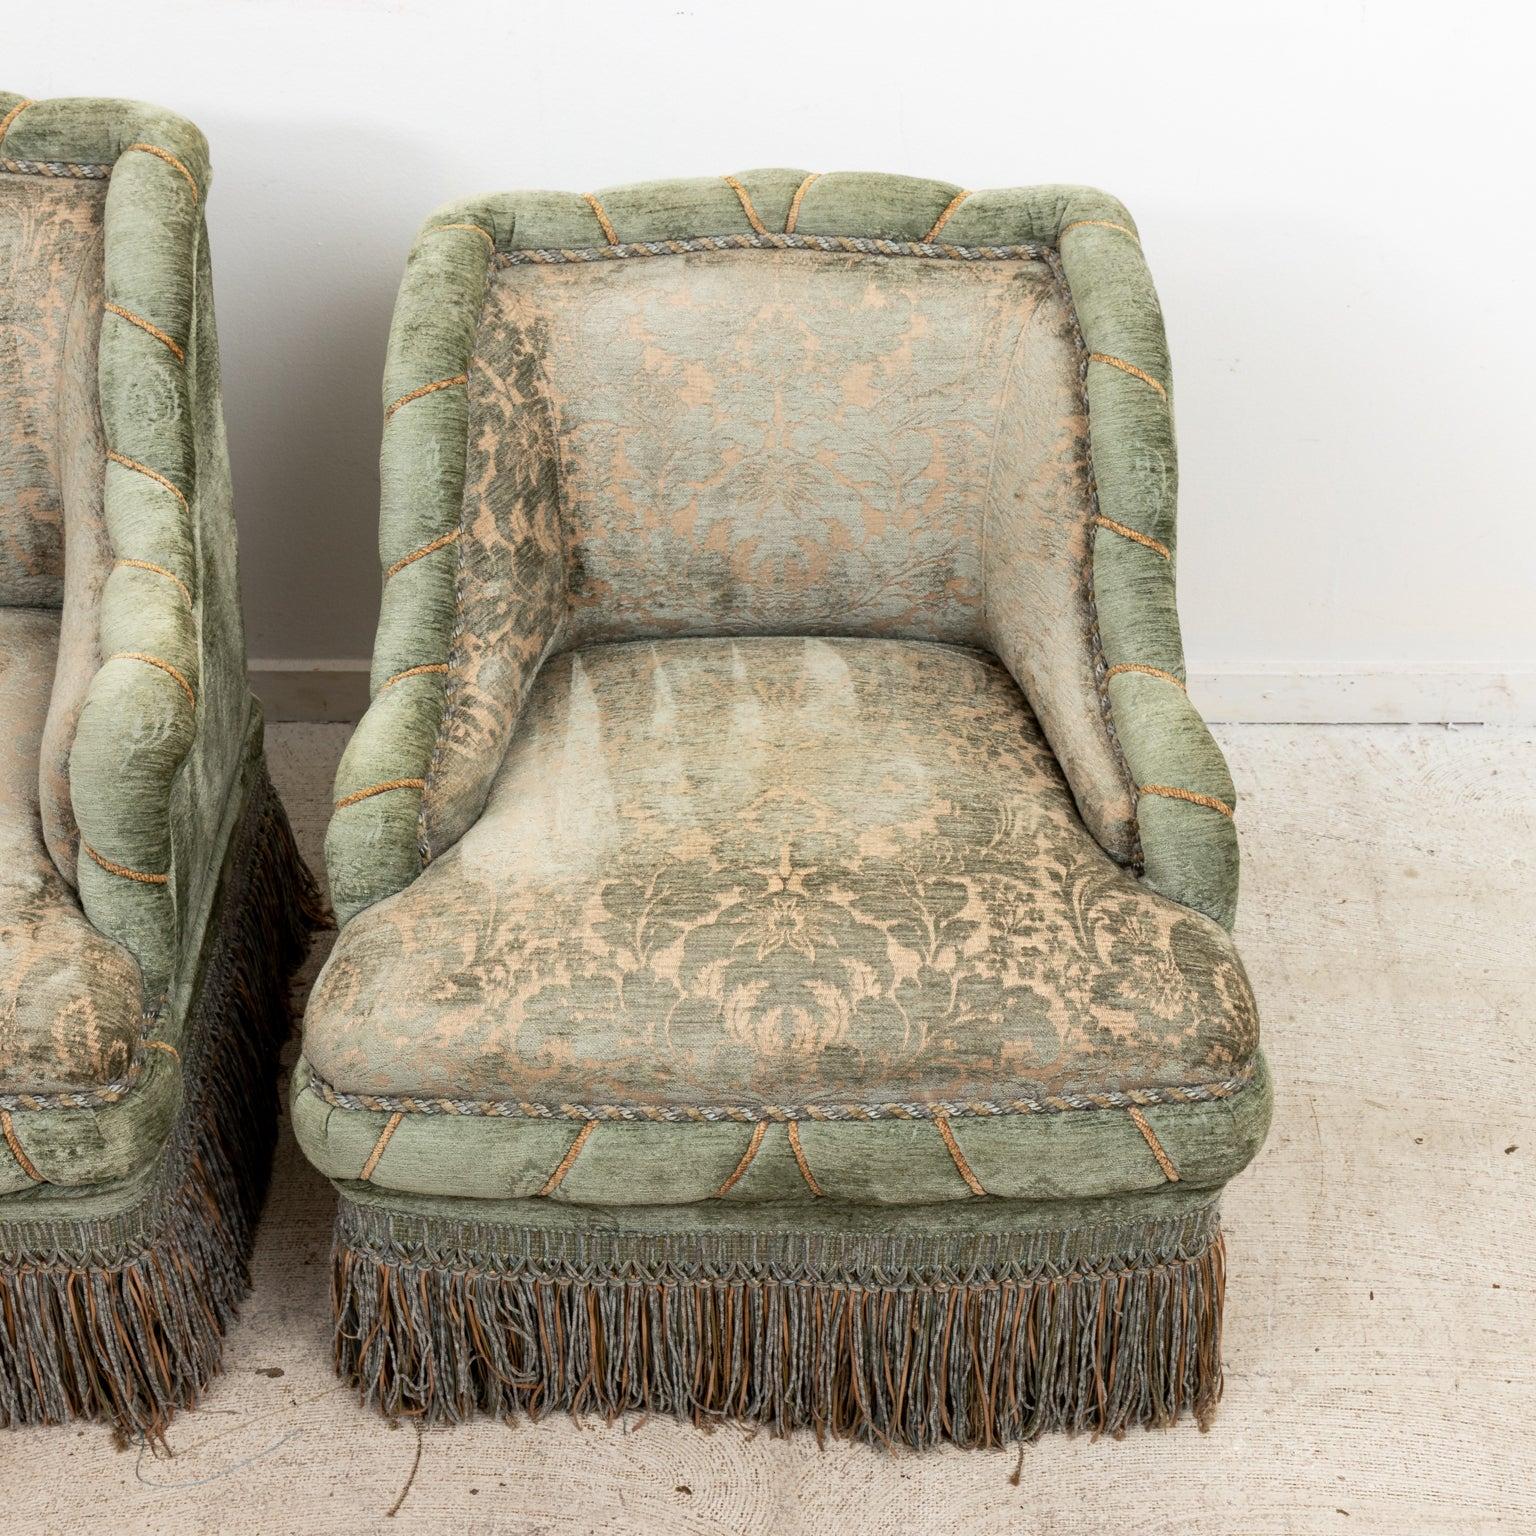 Pair Edwardian style damask upholstered armchairs with fringe trim. The Pair of chairs are not the same size. The larger chair is 29 inches wide, 30 inches high, 28 inches deep, 16 inches seat height. The smaller chair is 27 inches wide, 27.5 inches